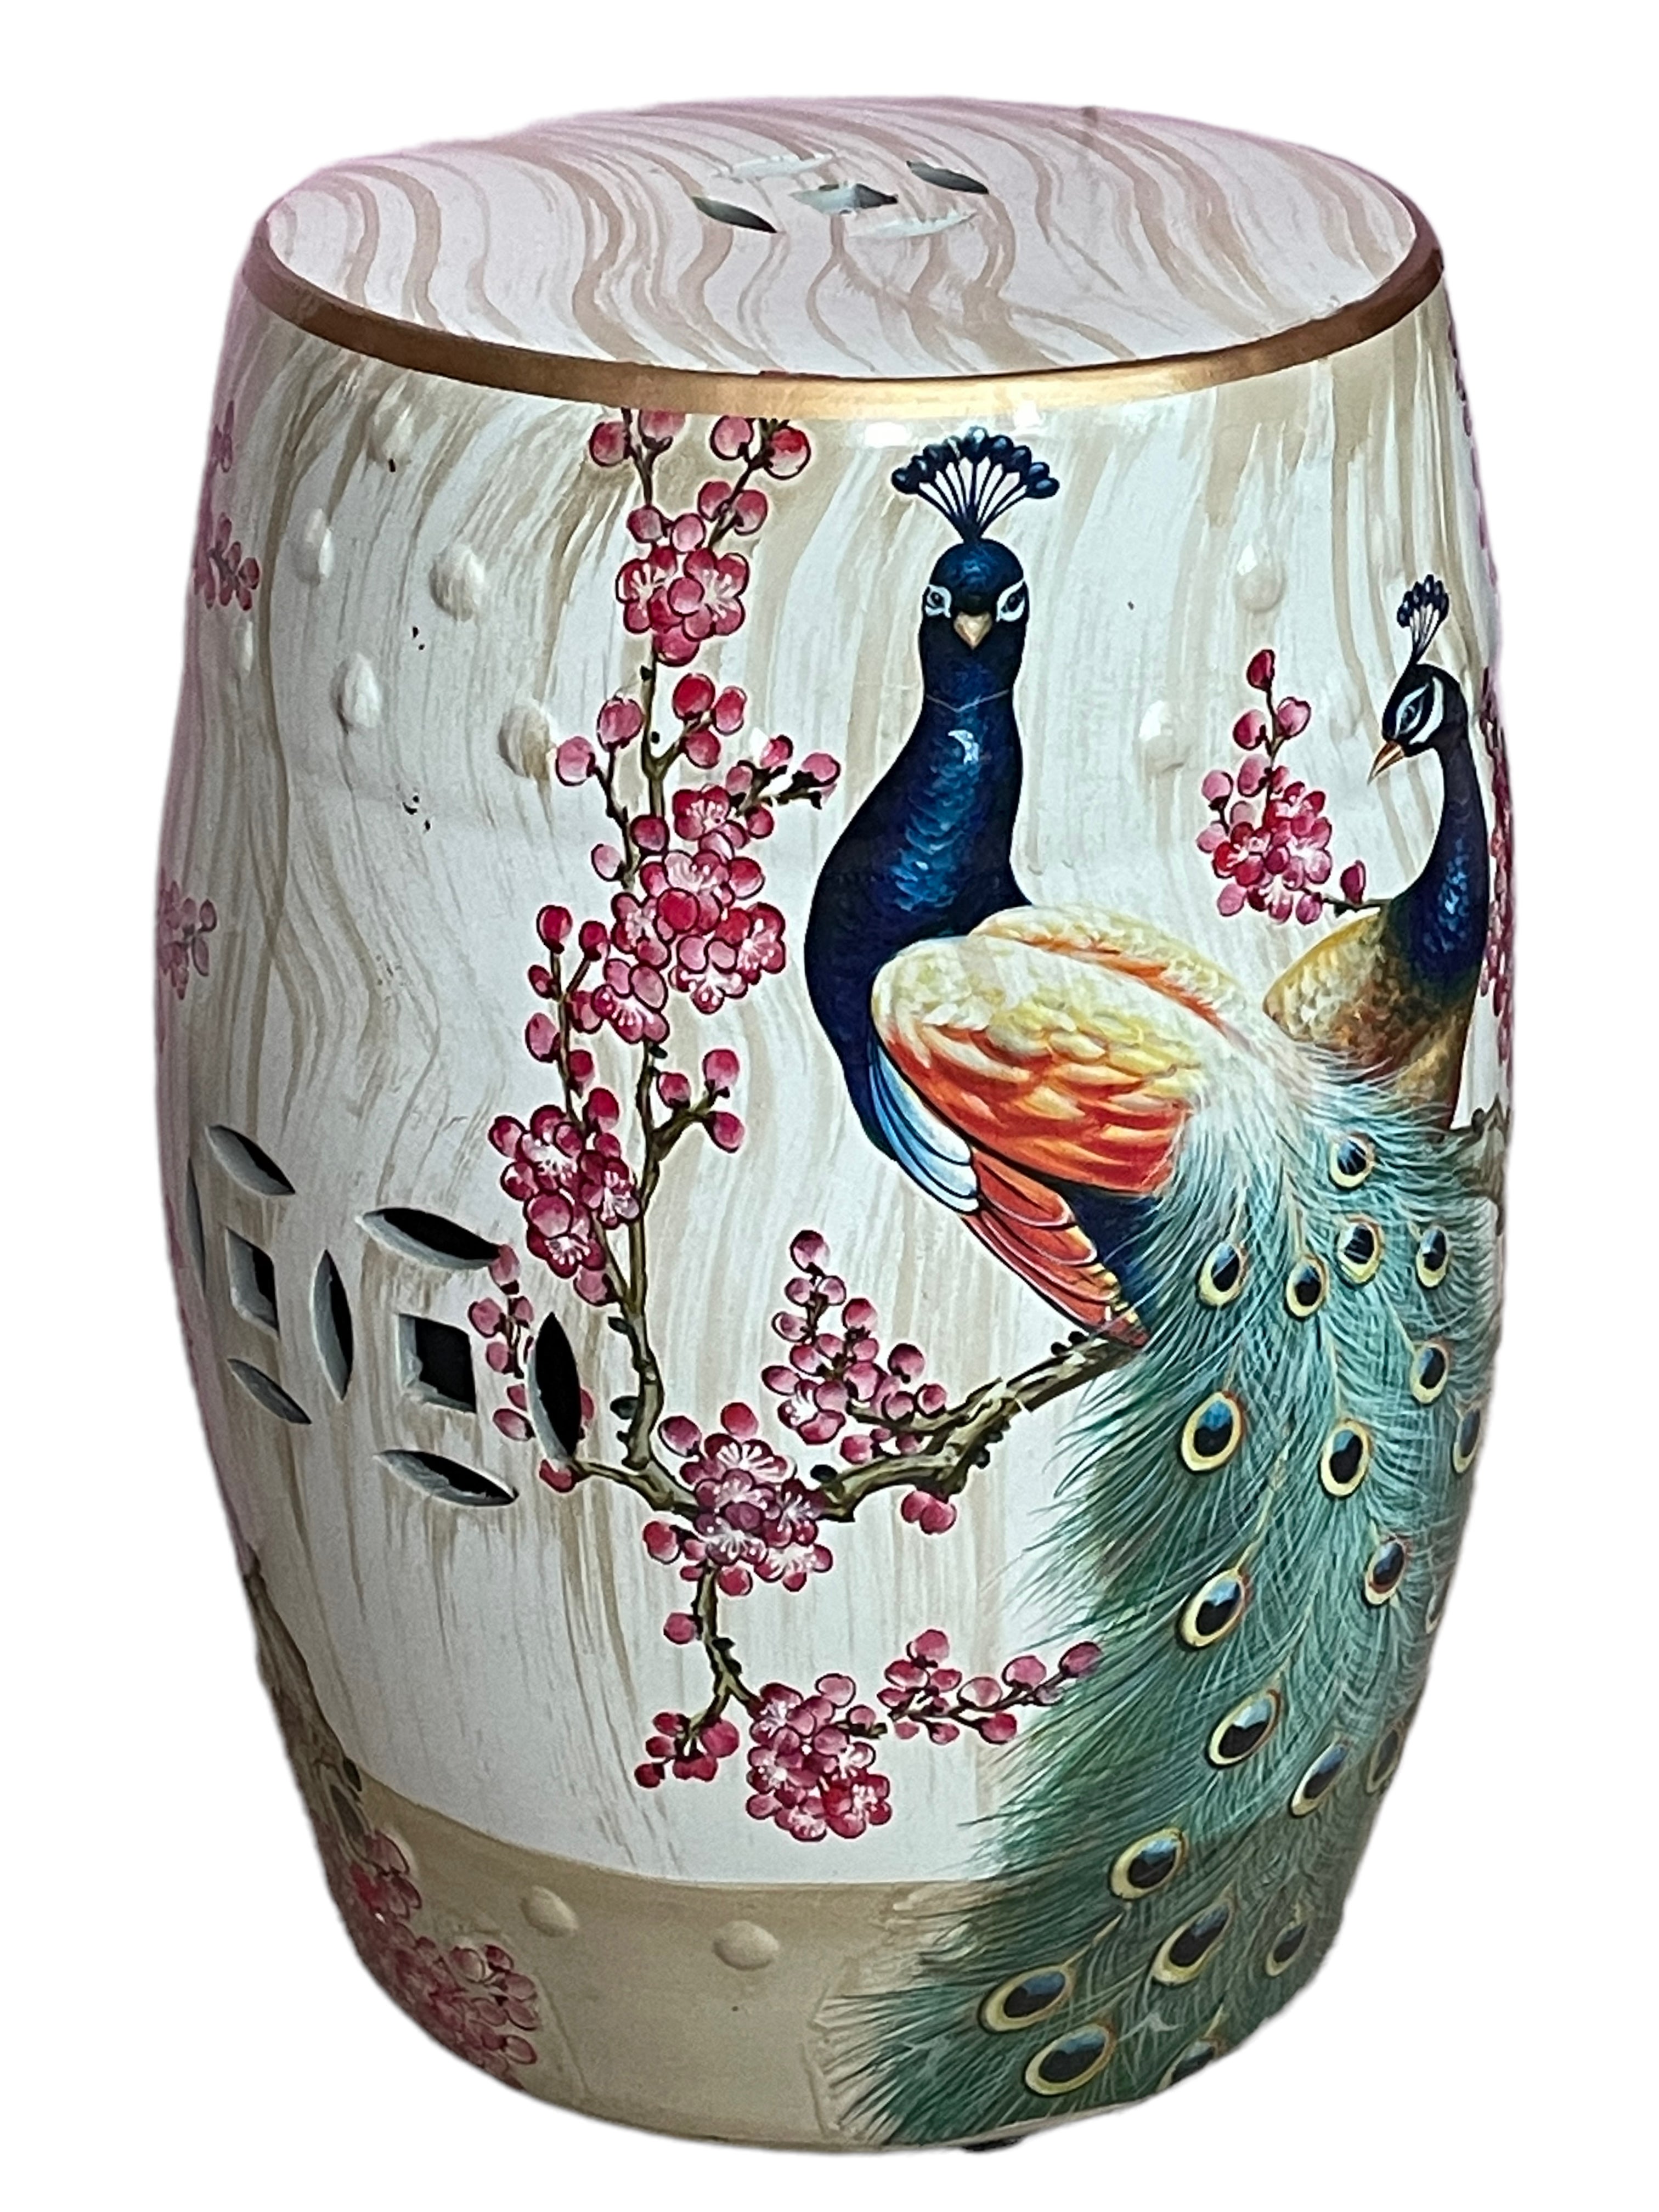 Hollywood Regency Mid-20th Century Chinese Export Hand-Painted Garden Stool Flower Pot Seat For Sale